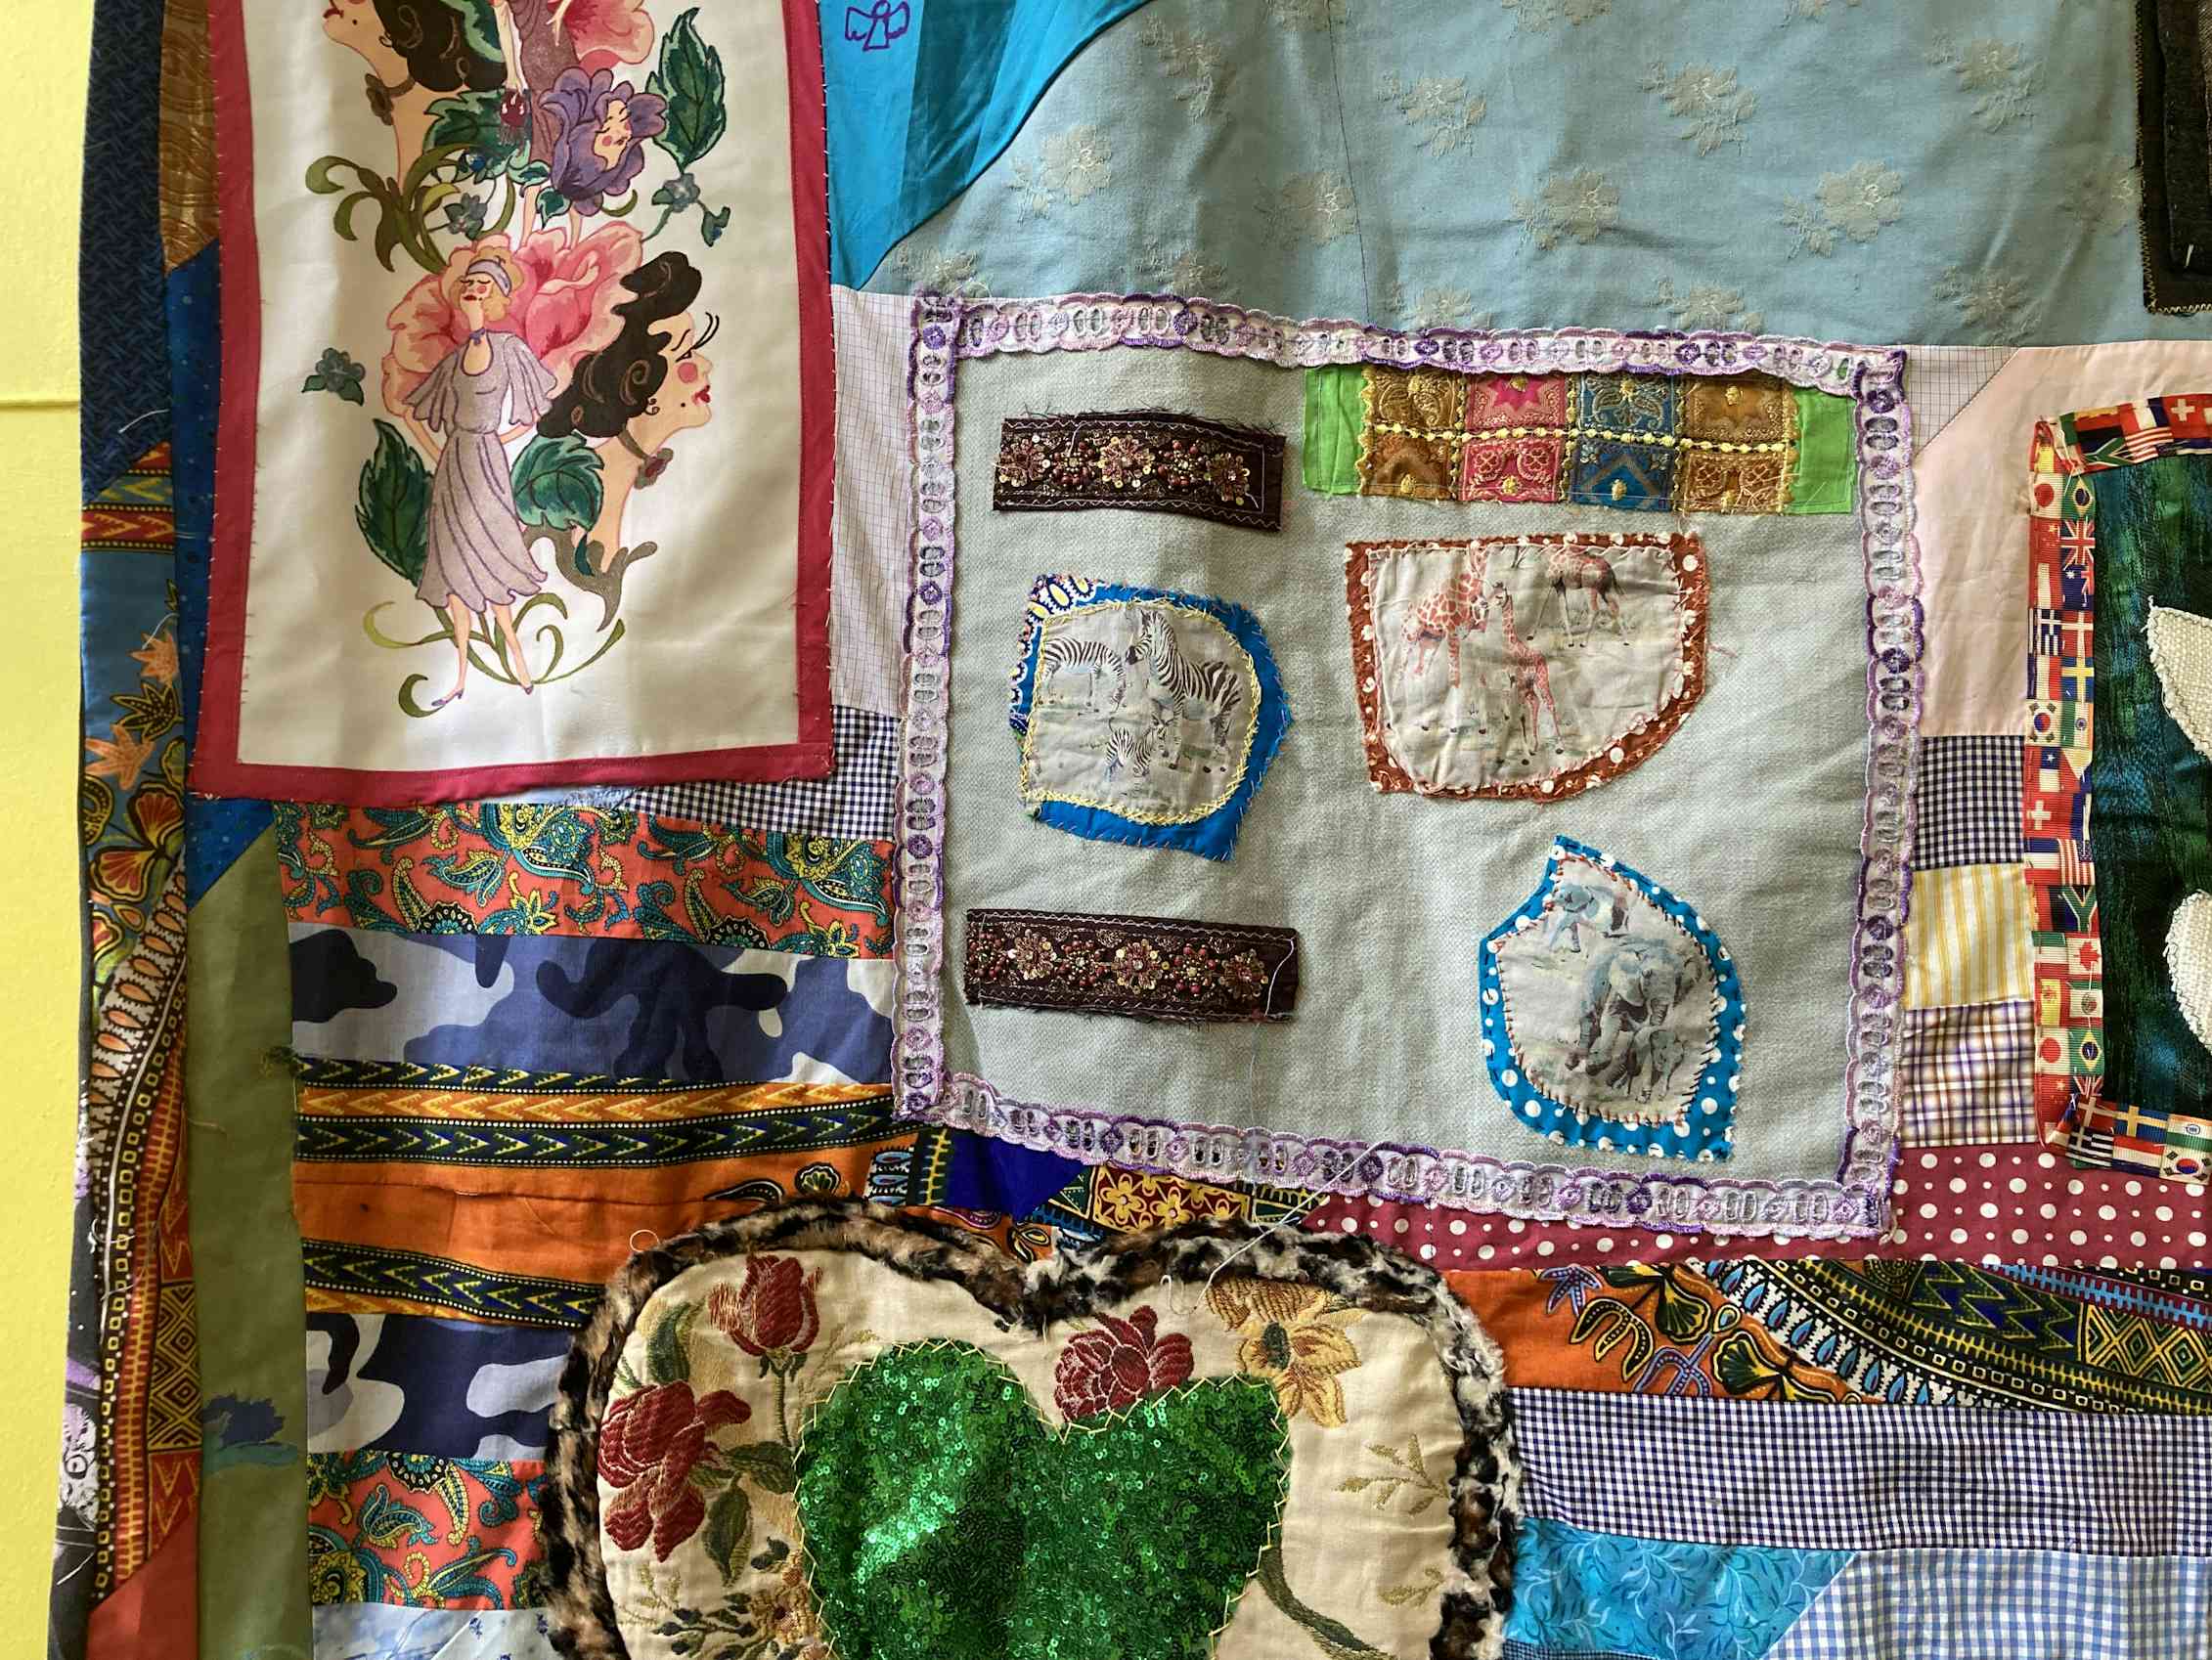 A detail of the quilt.